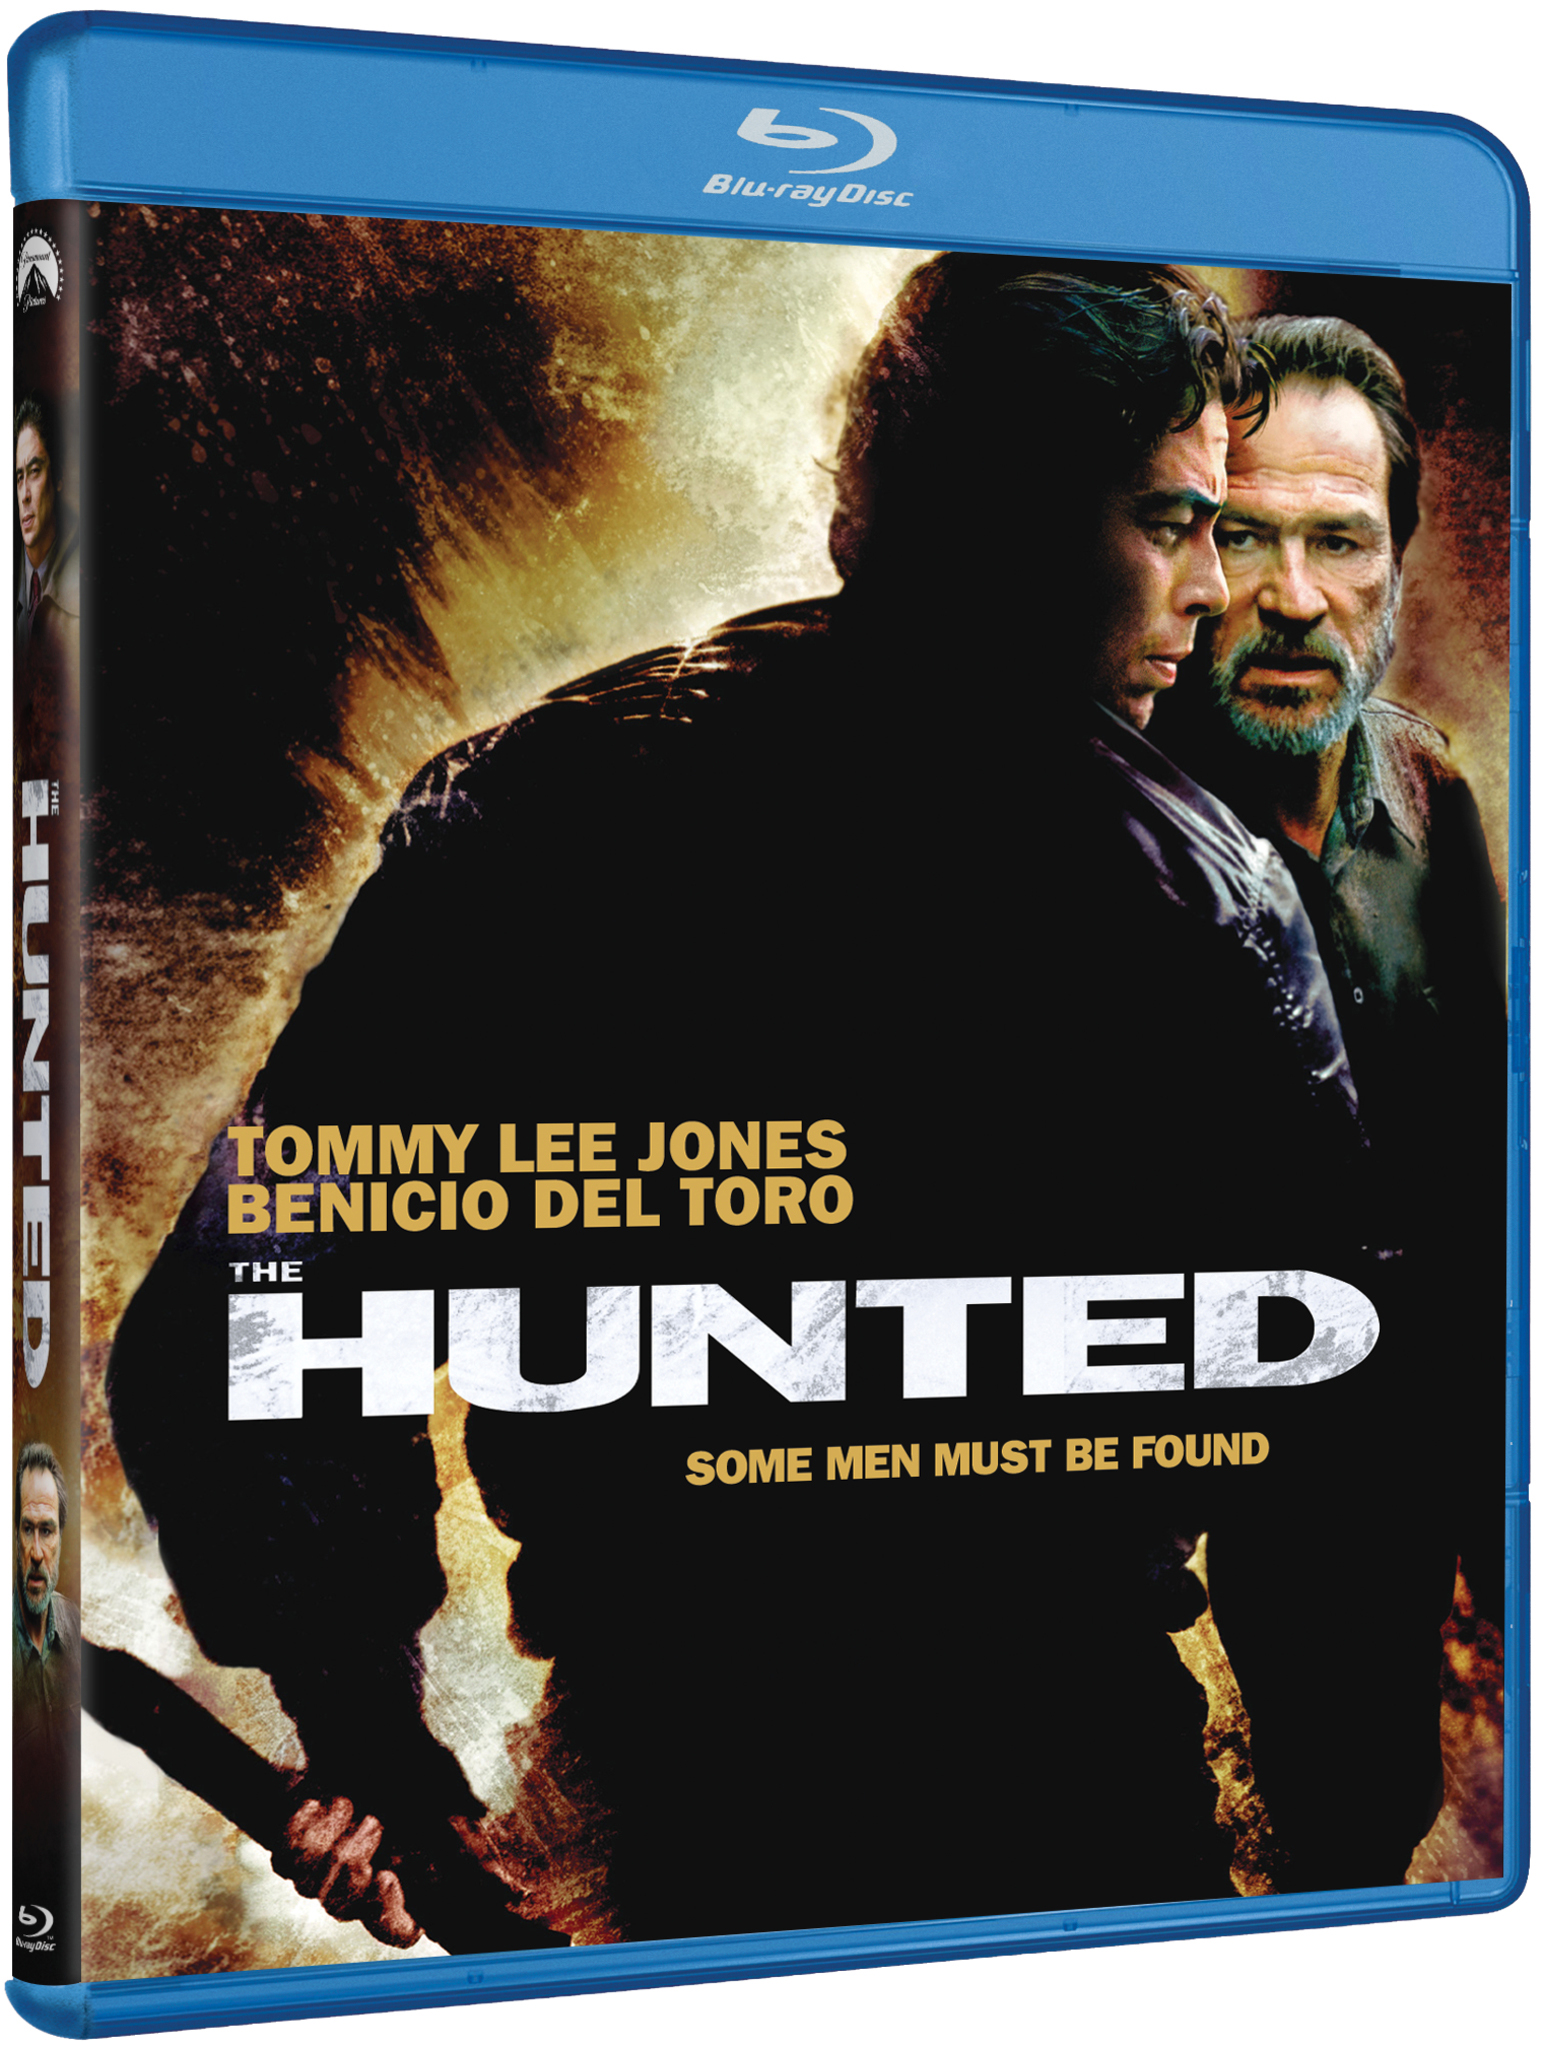 The Hunted [Blu-ray] [2003] - Best Buy